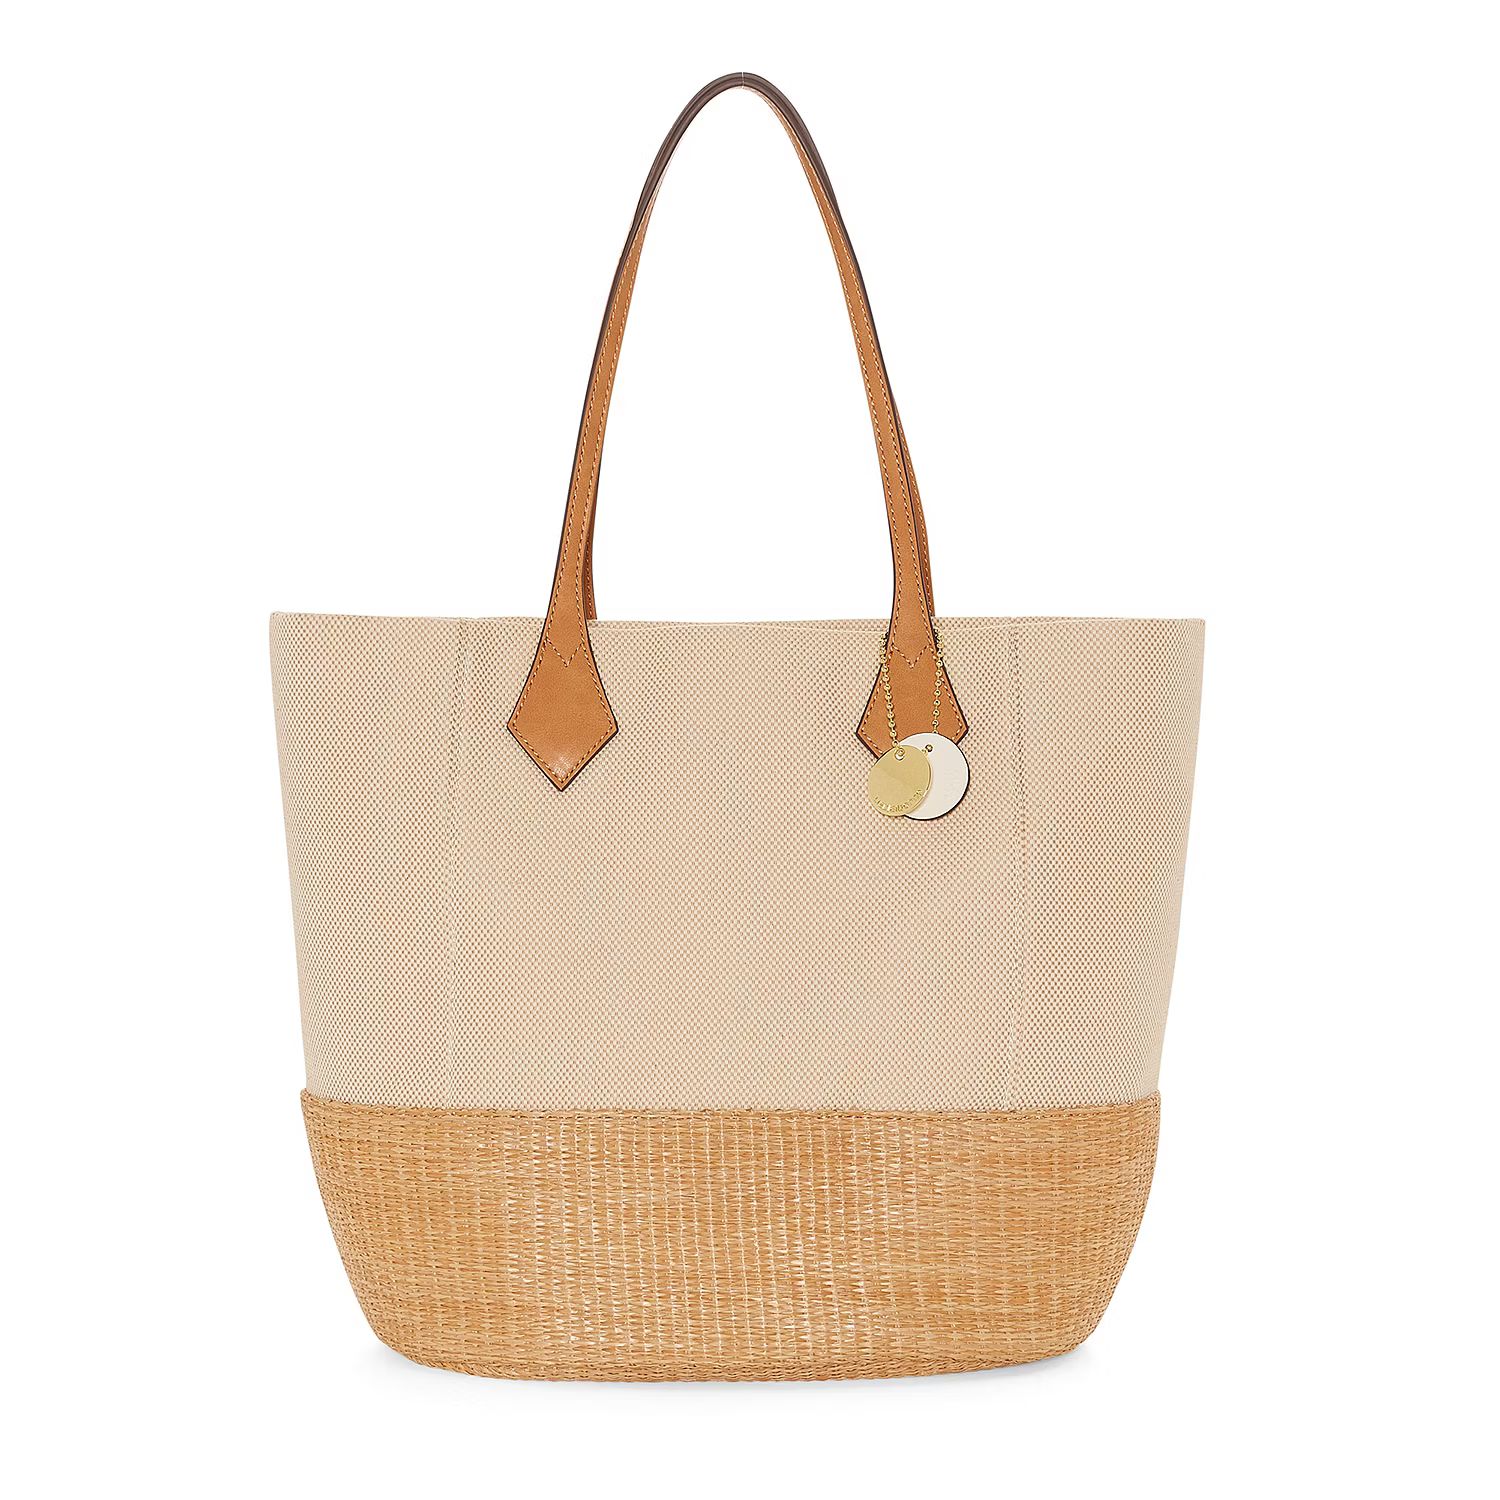 new!Liz Claiborne Amy Tote Bag | JCPenney